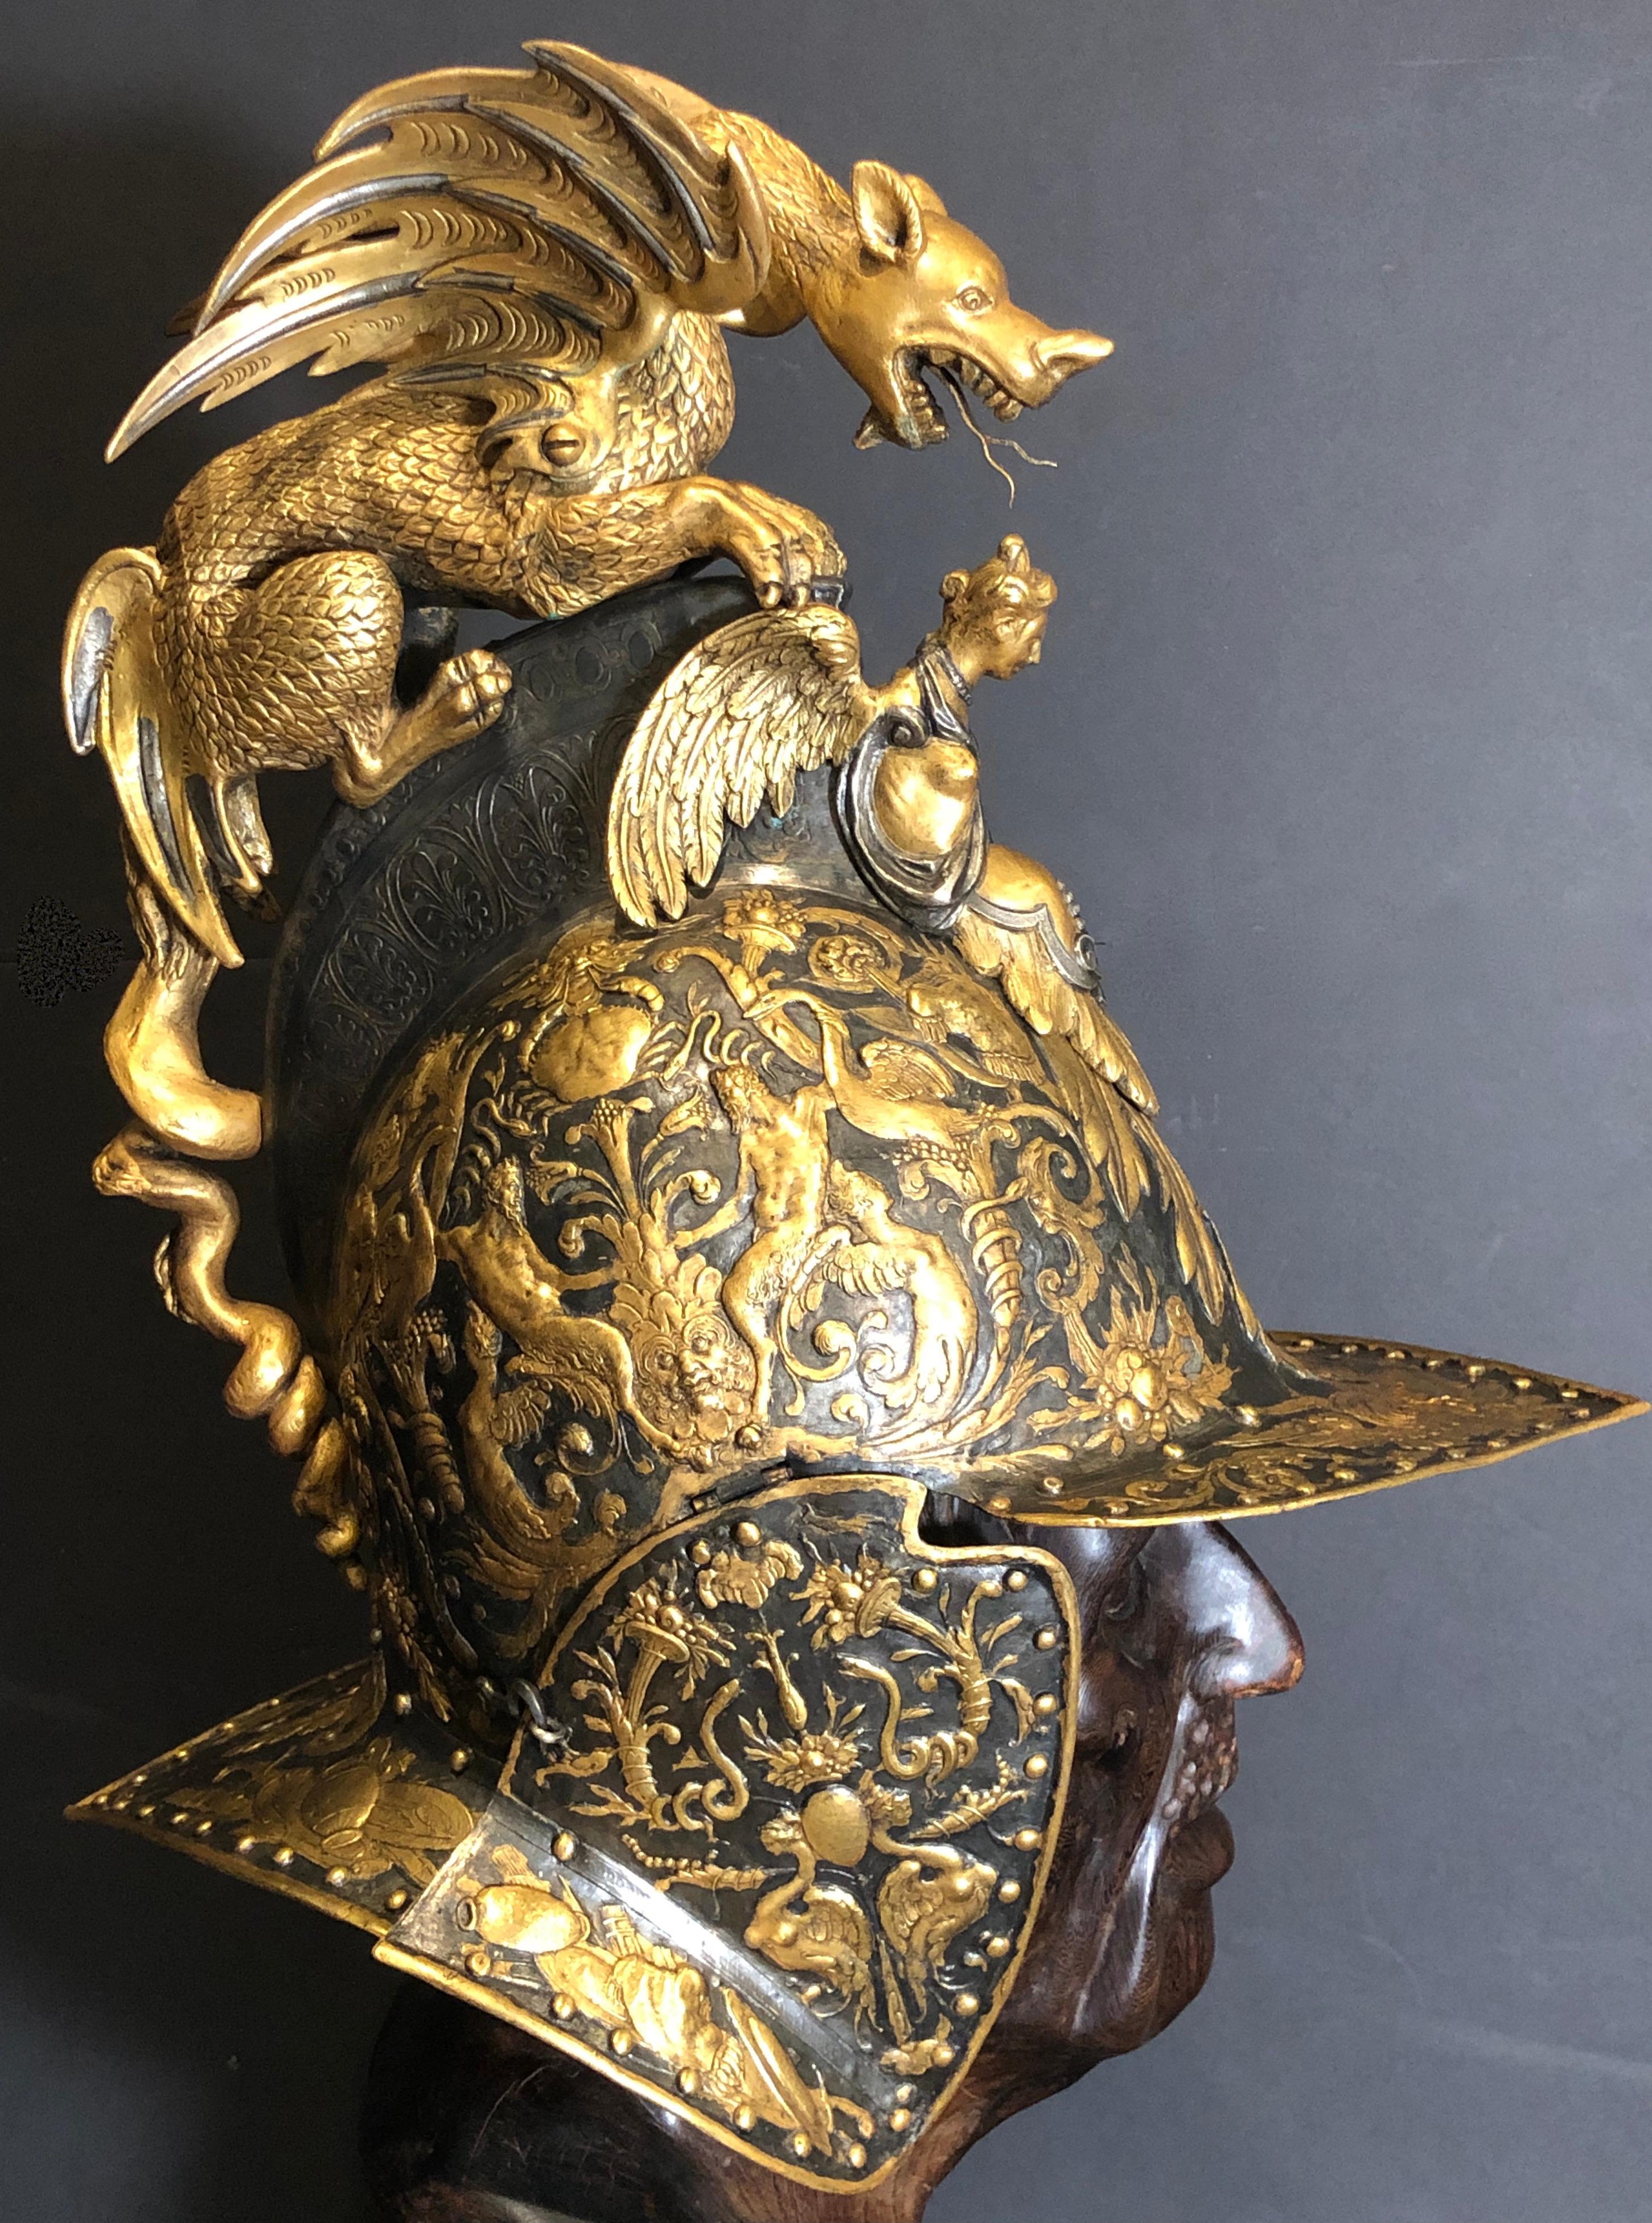 19th century gilt and silvered Victorian museum reproduction of king Henry II of France embossed burgonet helmet. Helmet skull of typical form. The entire helmet is completely embossed with mythological figures from Greek and roman culture, floral